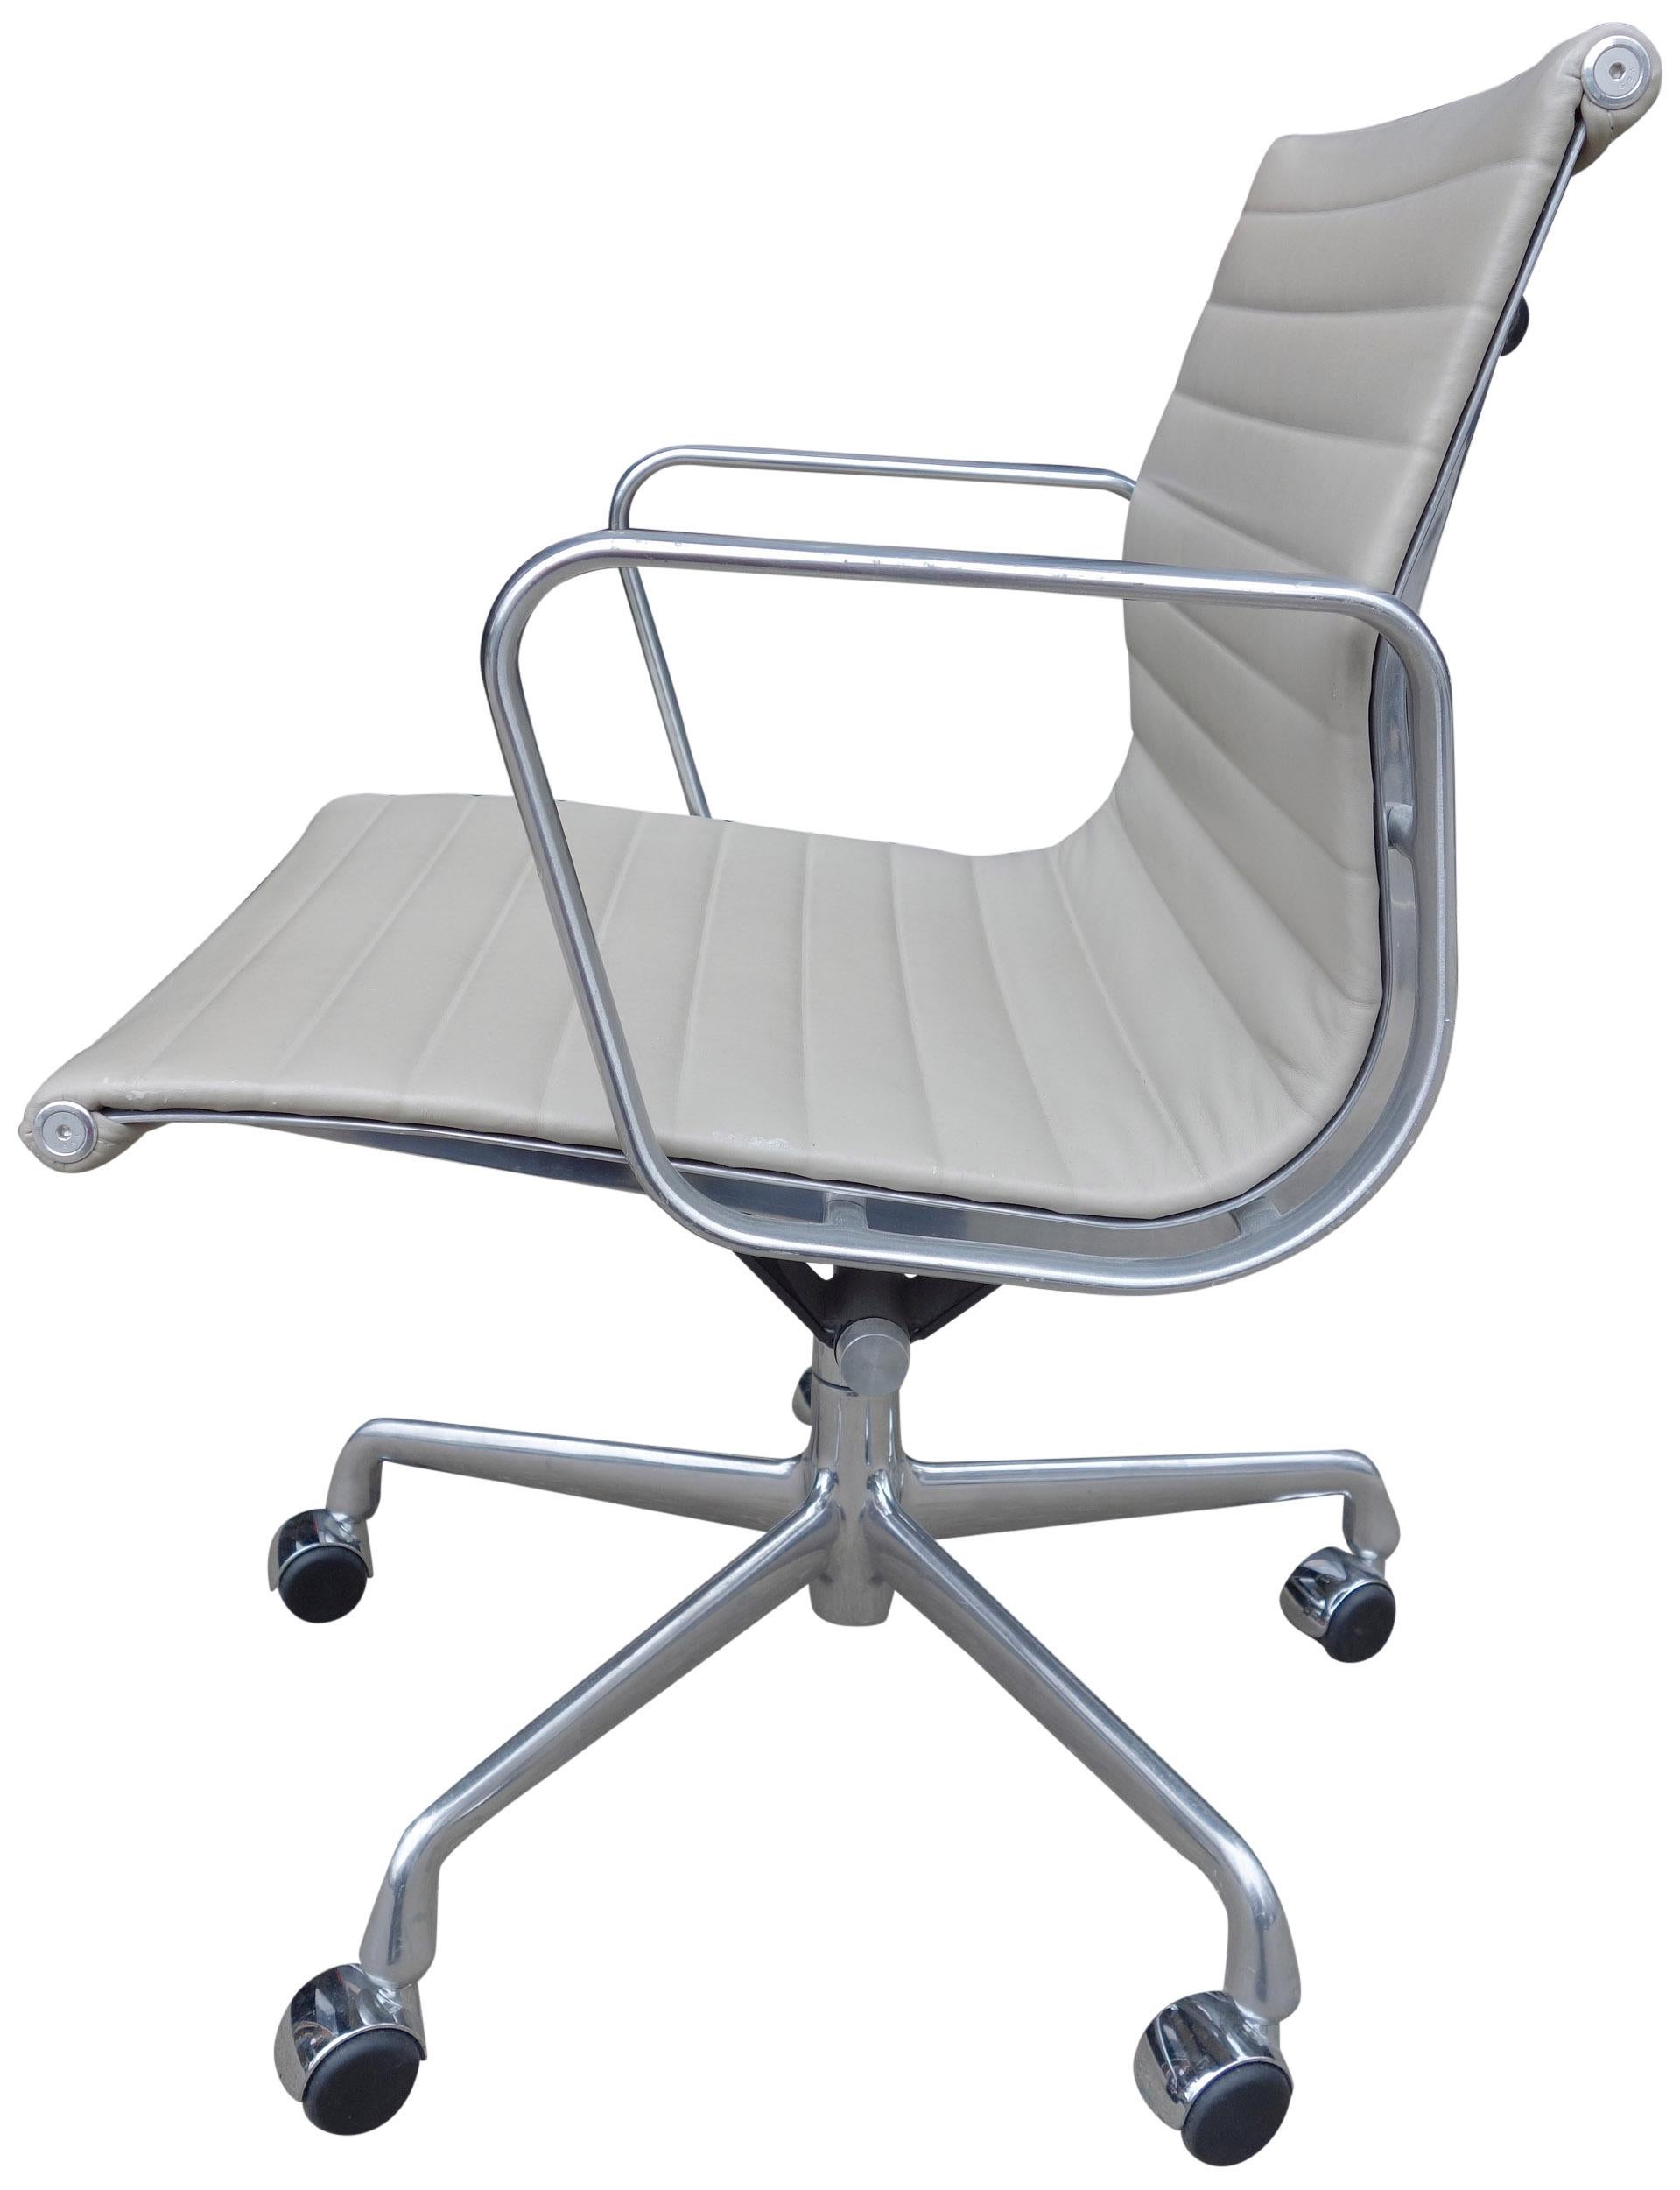 For your consideration are up to 4 aluminum group chairs in stone /off-white leather on a 5 star base designed by Eames for Herman Miller. All in good original condition showing expected wear consistent with age and use. With tilt and height